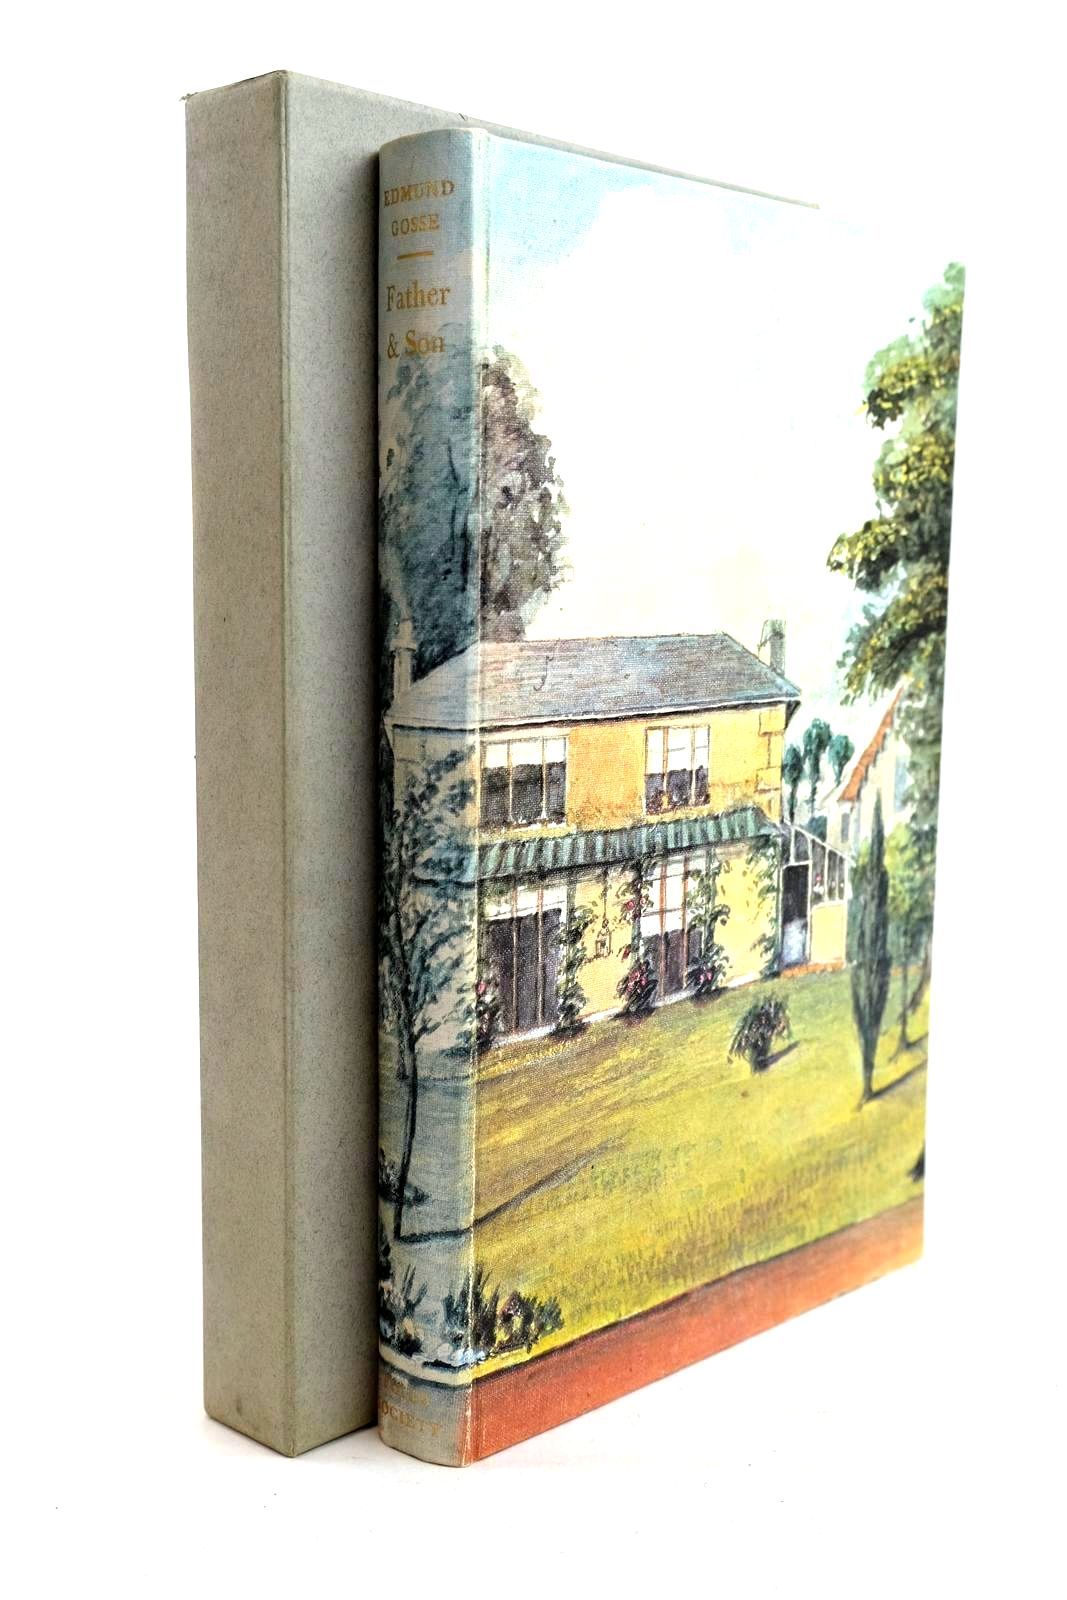 Photo of FATHER AND SON written by Gosse, Edmund published by Folio Society (STOCK CODE: 1320246)  for sale by Stella & Rose's Books